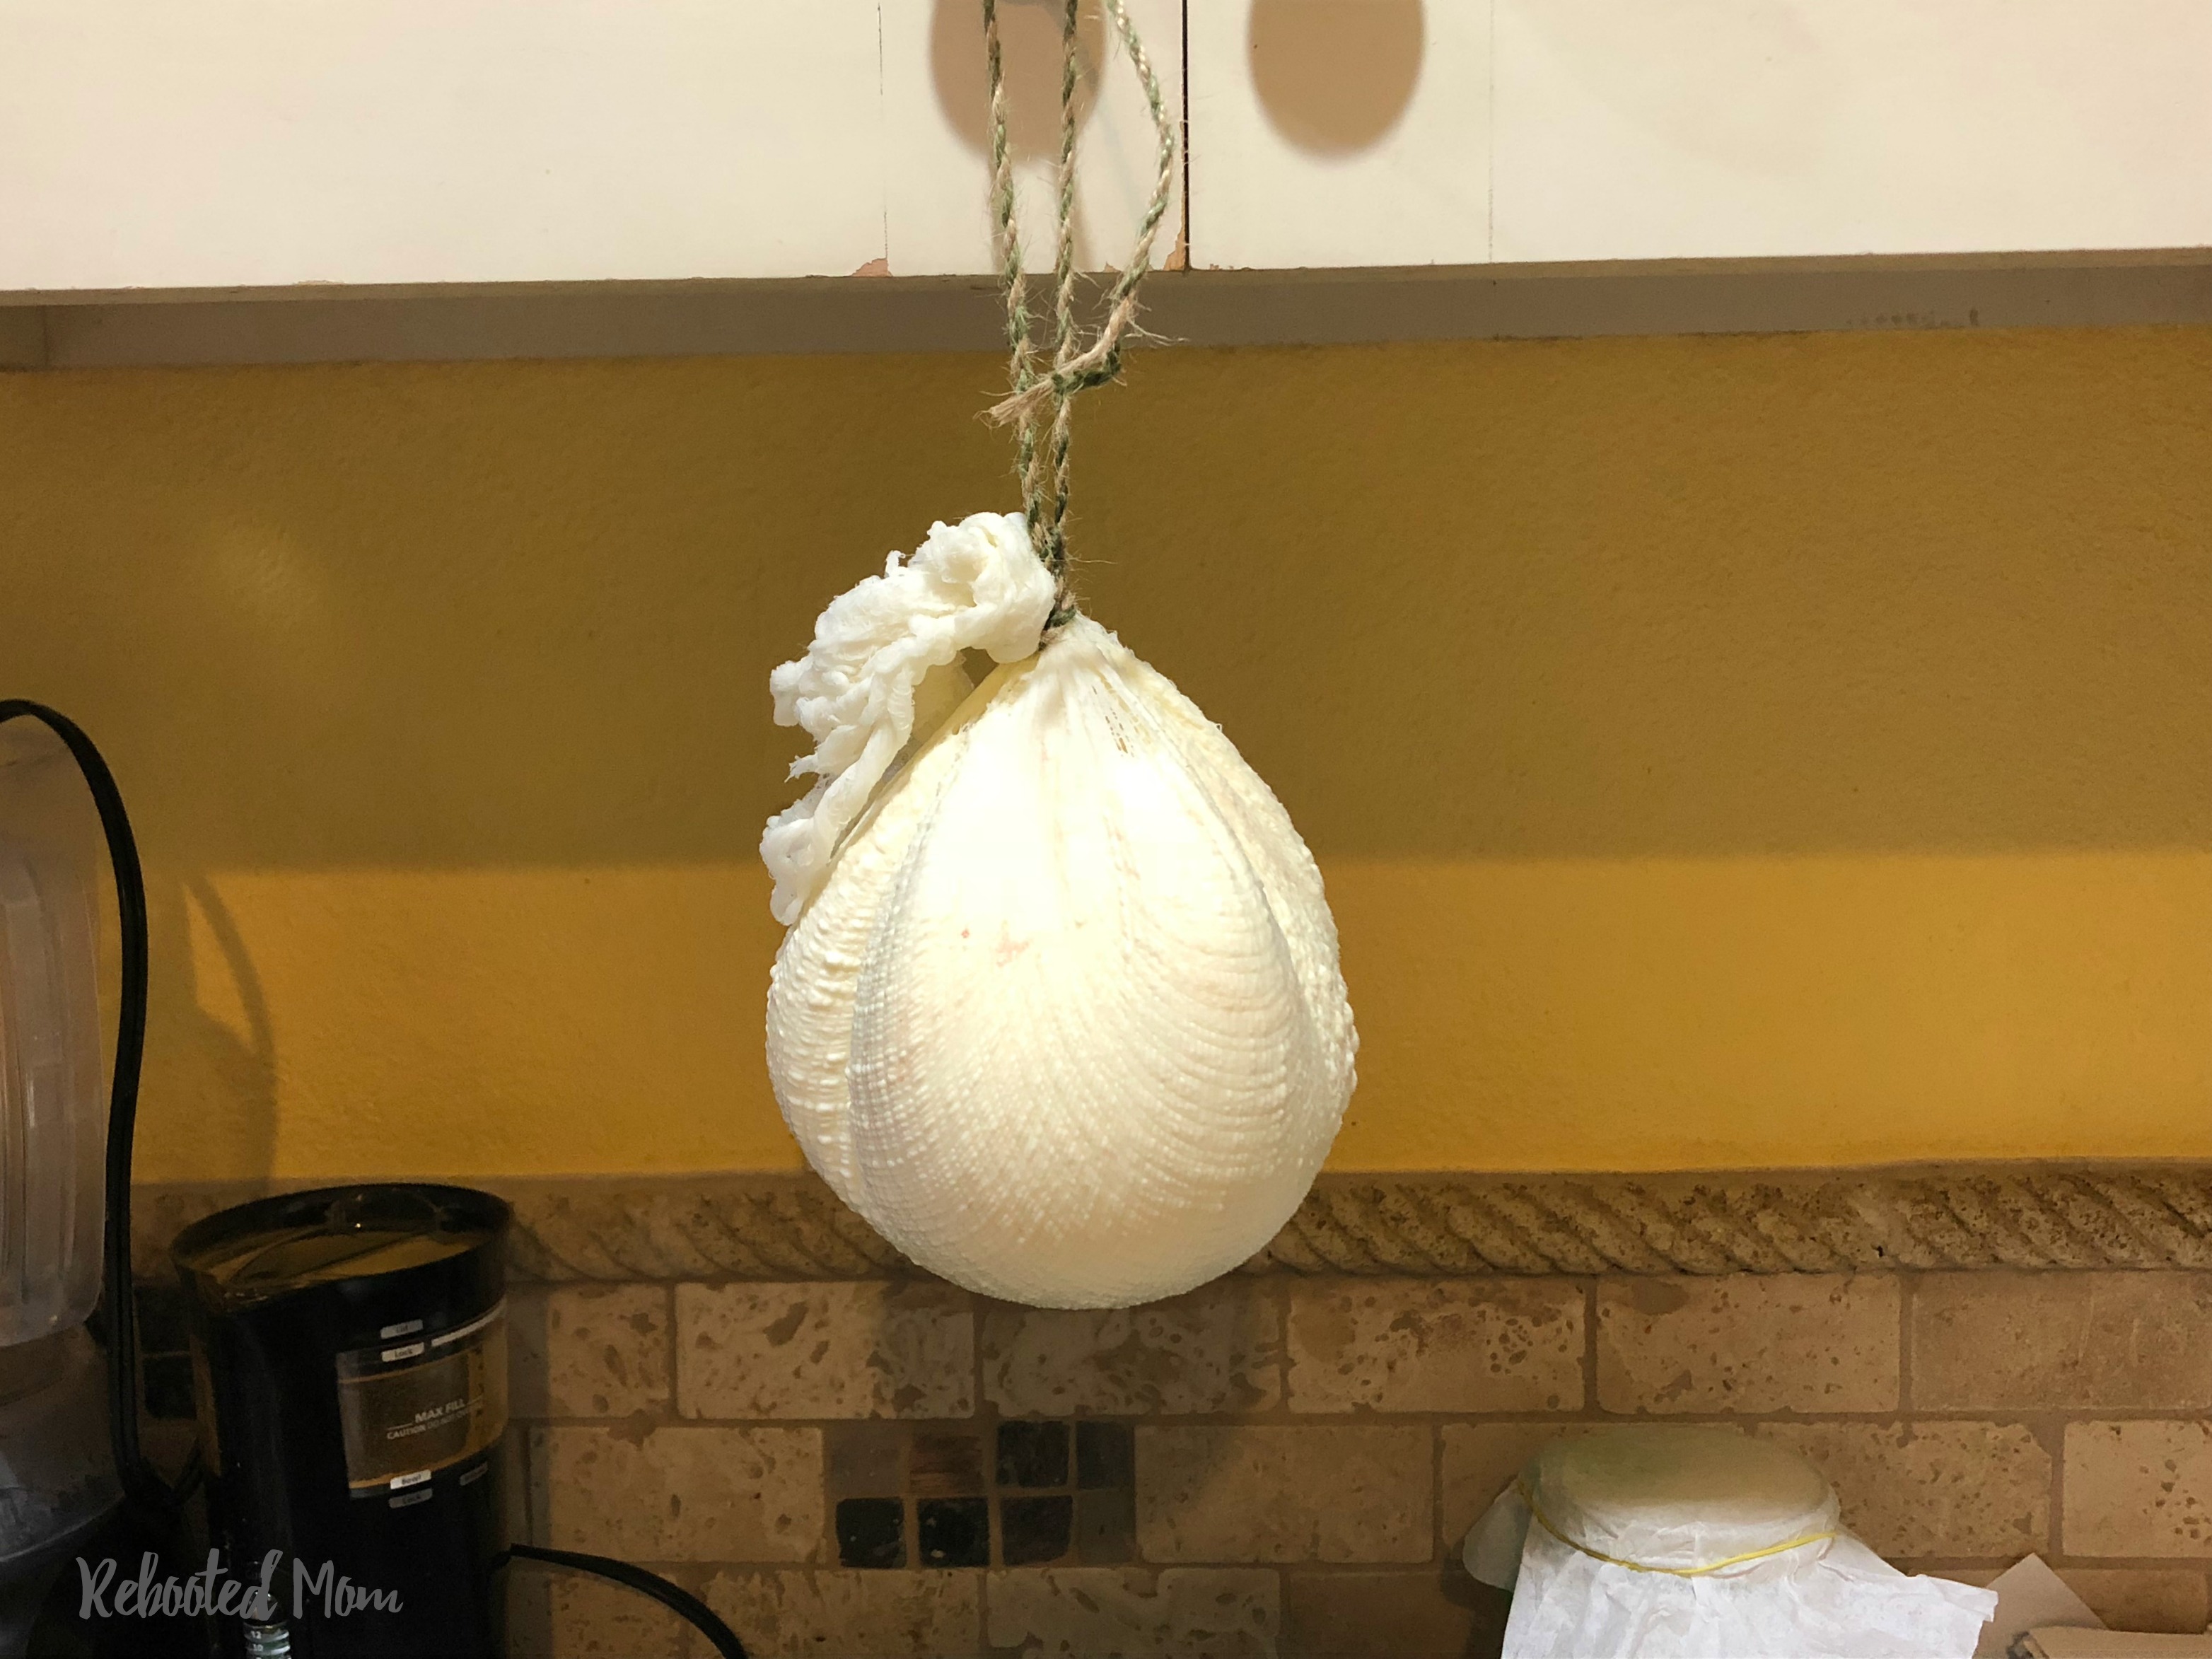 Cheese hanging from the cabinets to release whey